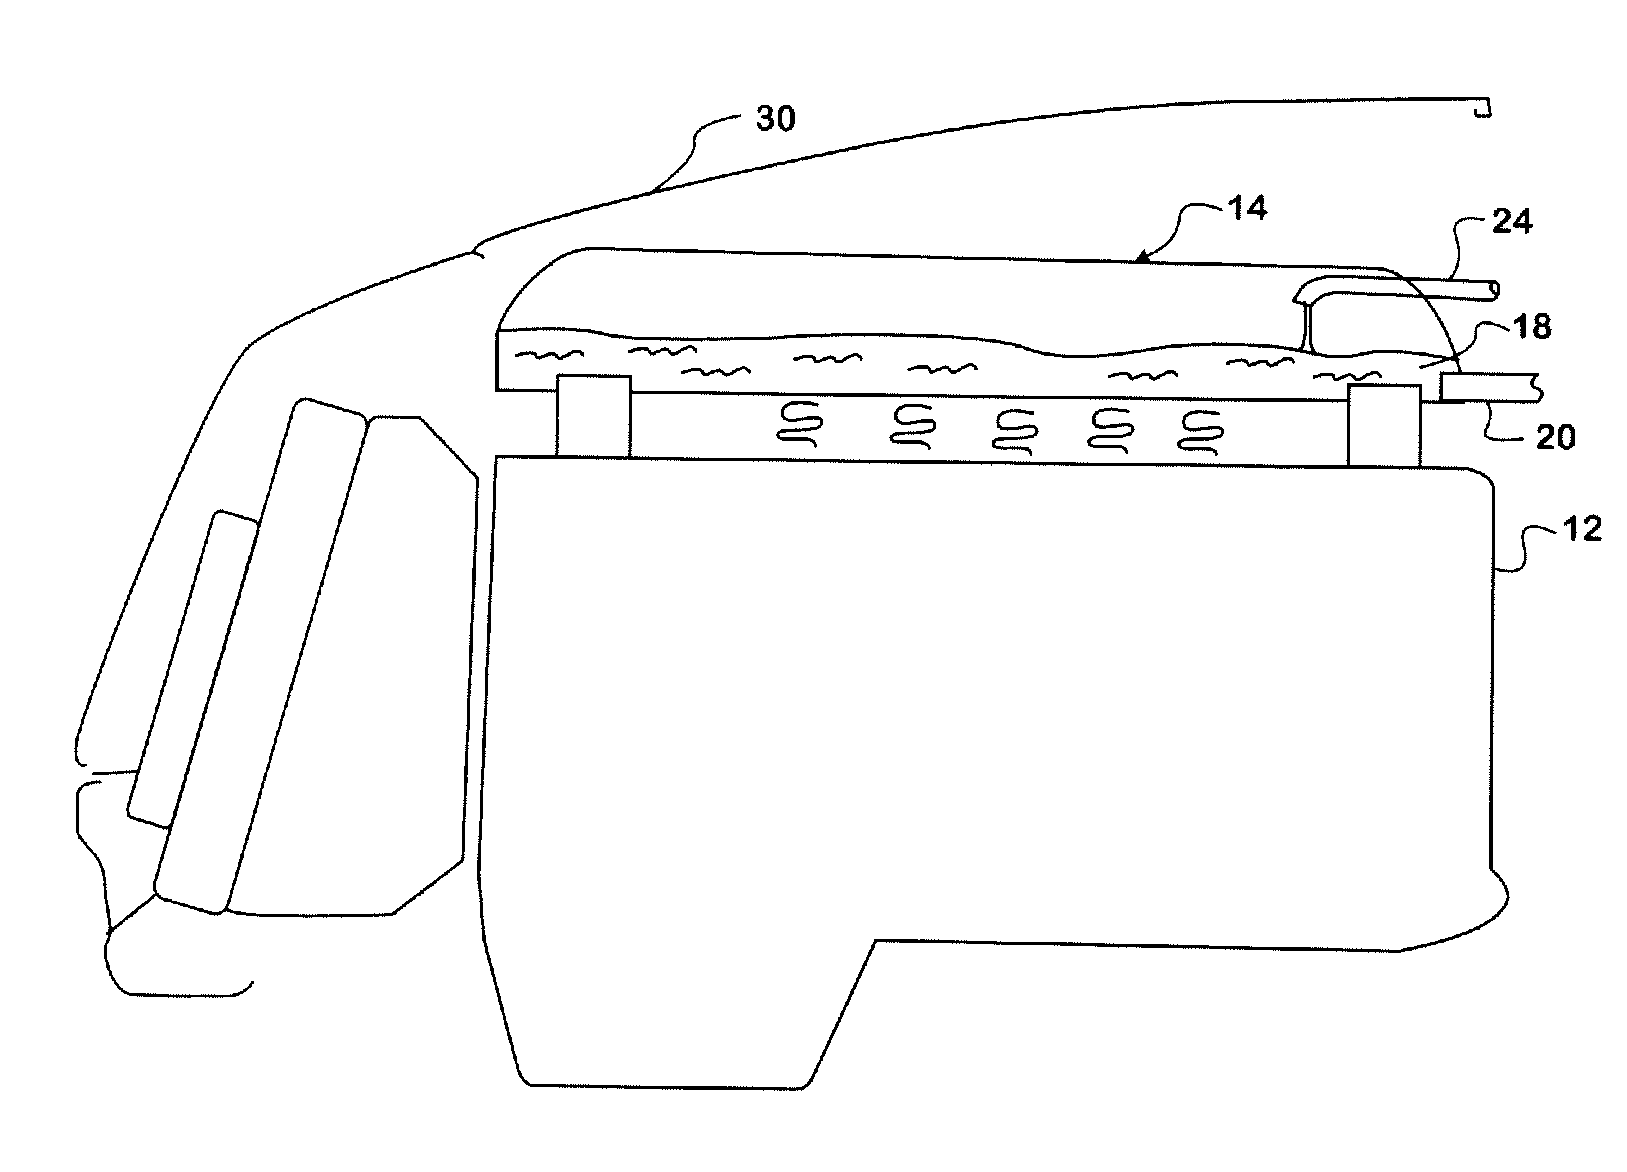 Thermosyphon heat reduction system for a motor vehicle engine compartment